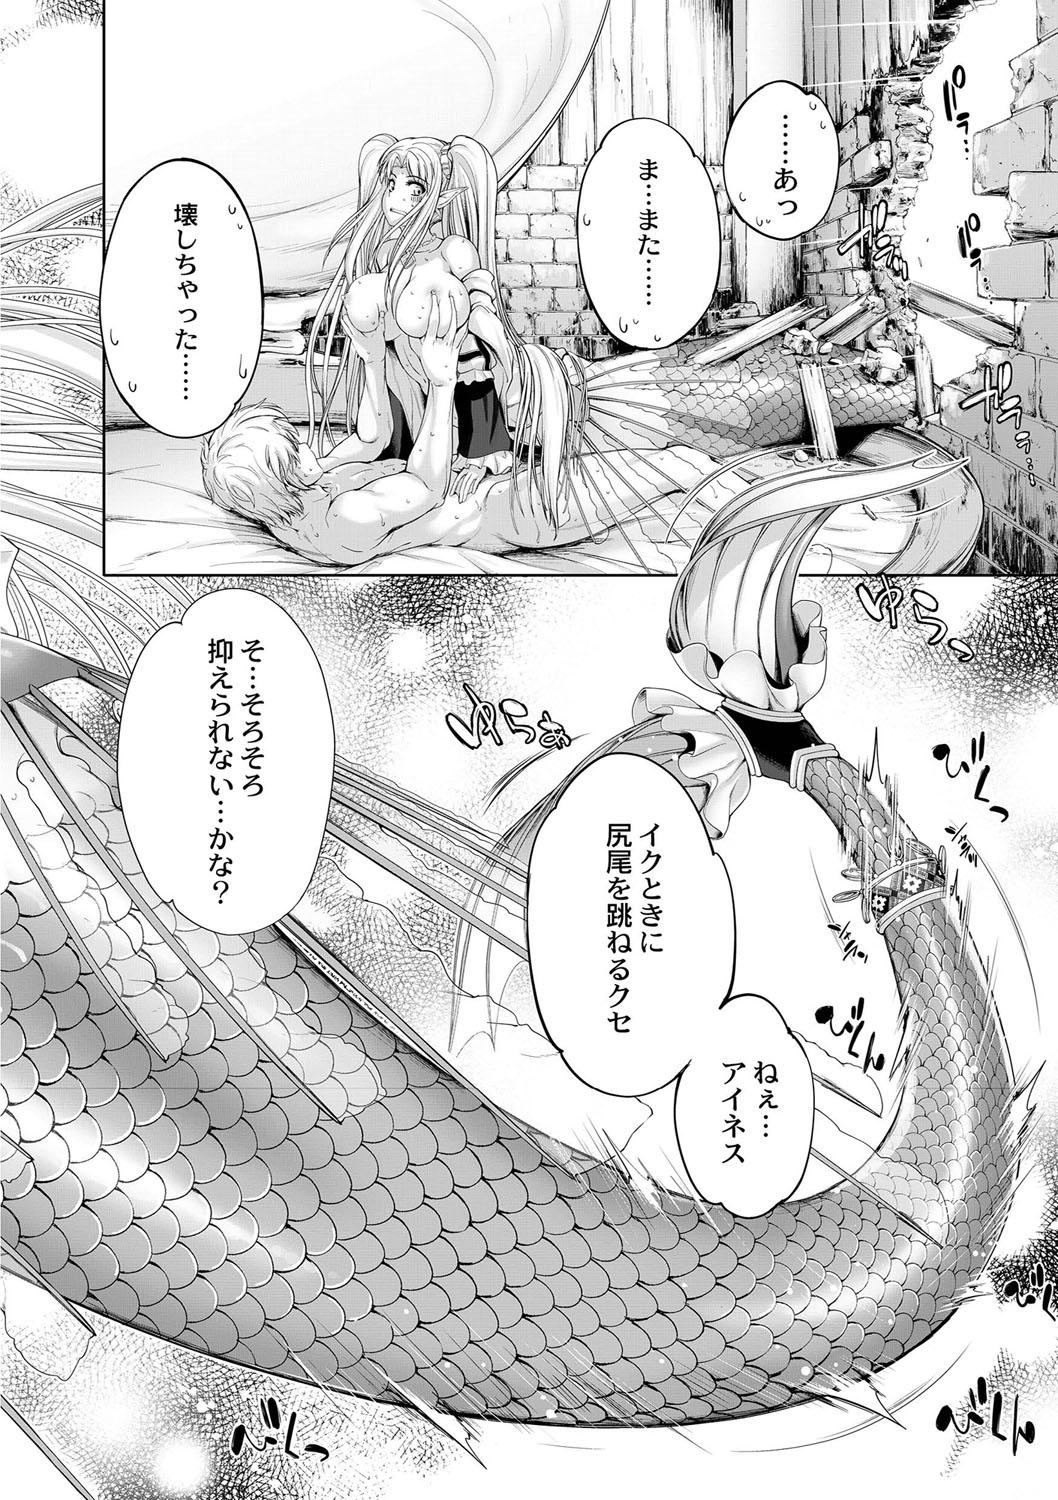 Pigtails Monster Girls no Koiro Circus Taiwan - Page 5